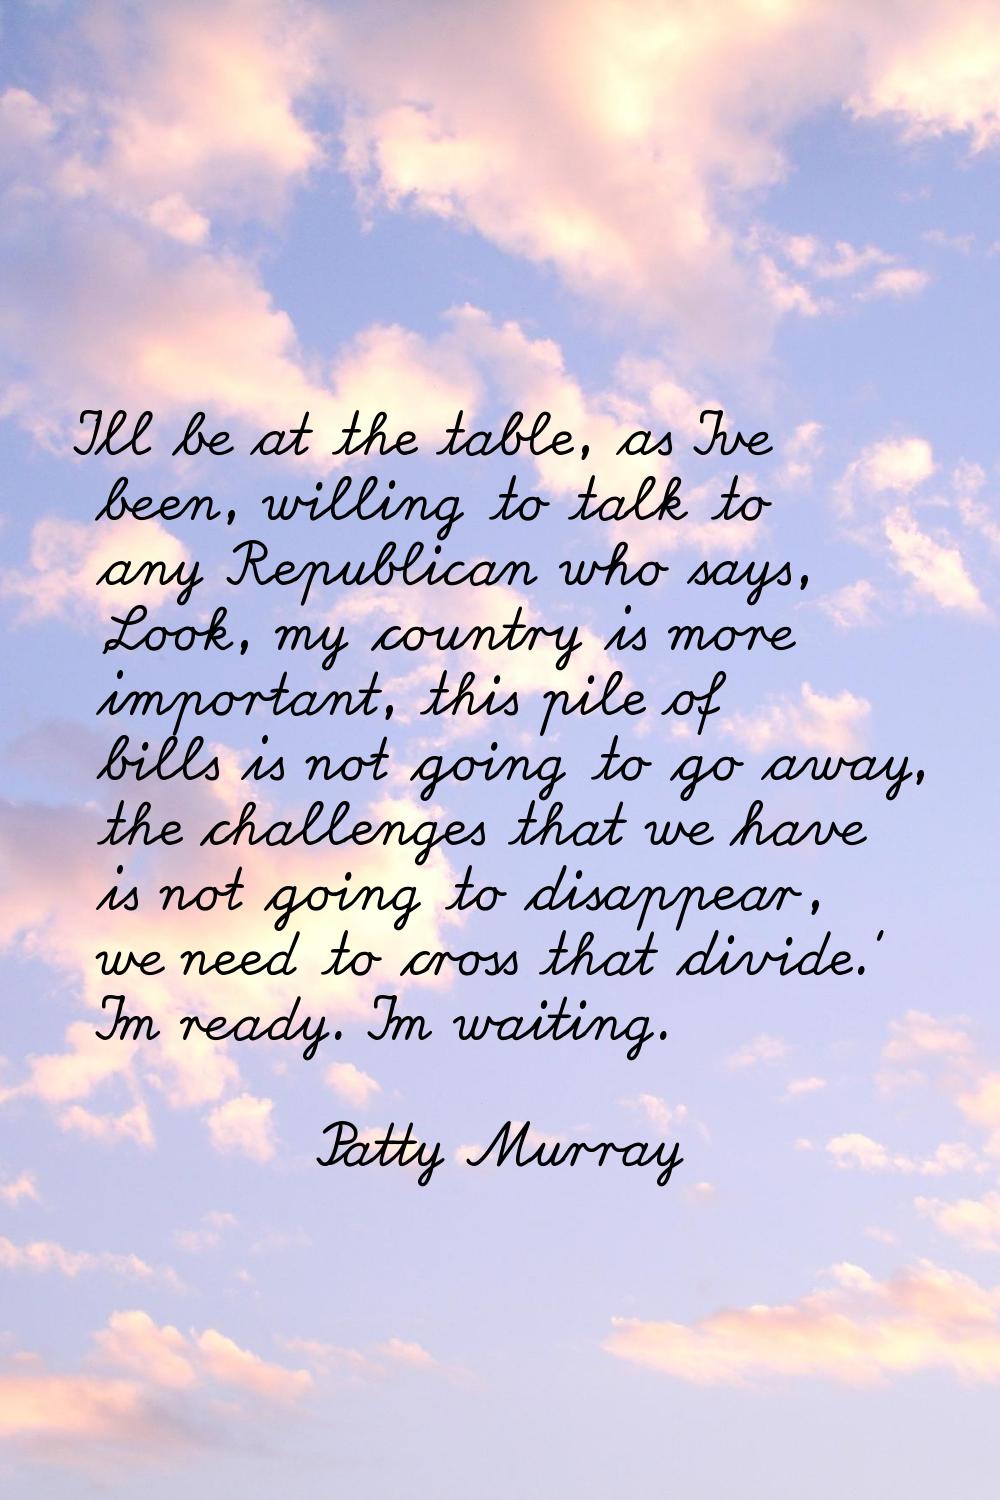 I'll be at the table, as I've been, willing to talk to any Republican who says, 'Look, my country i